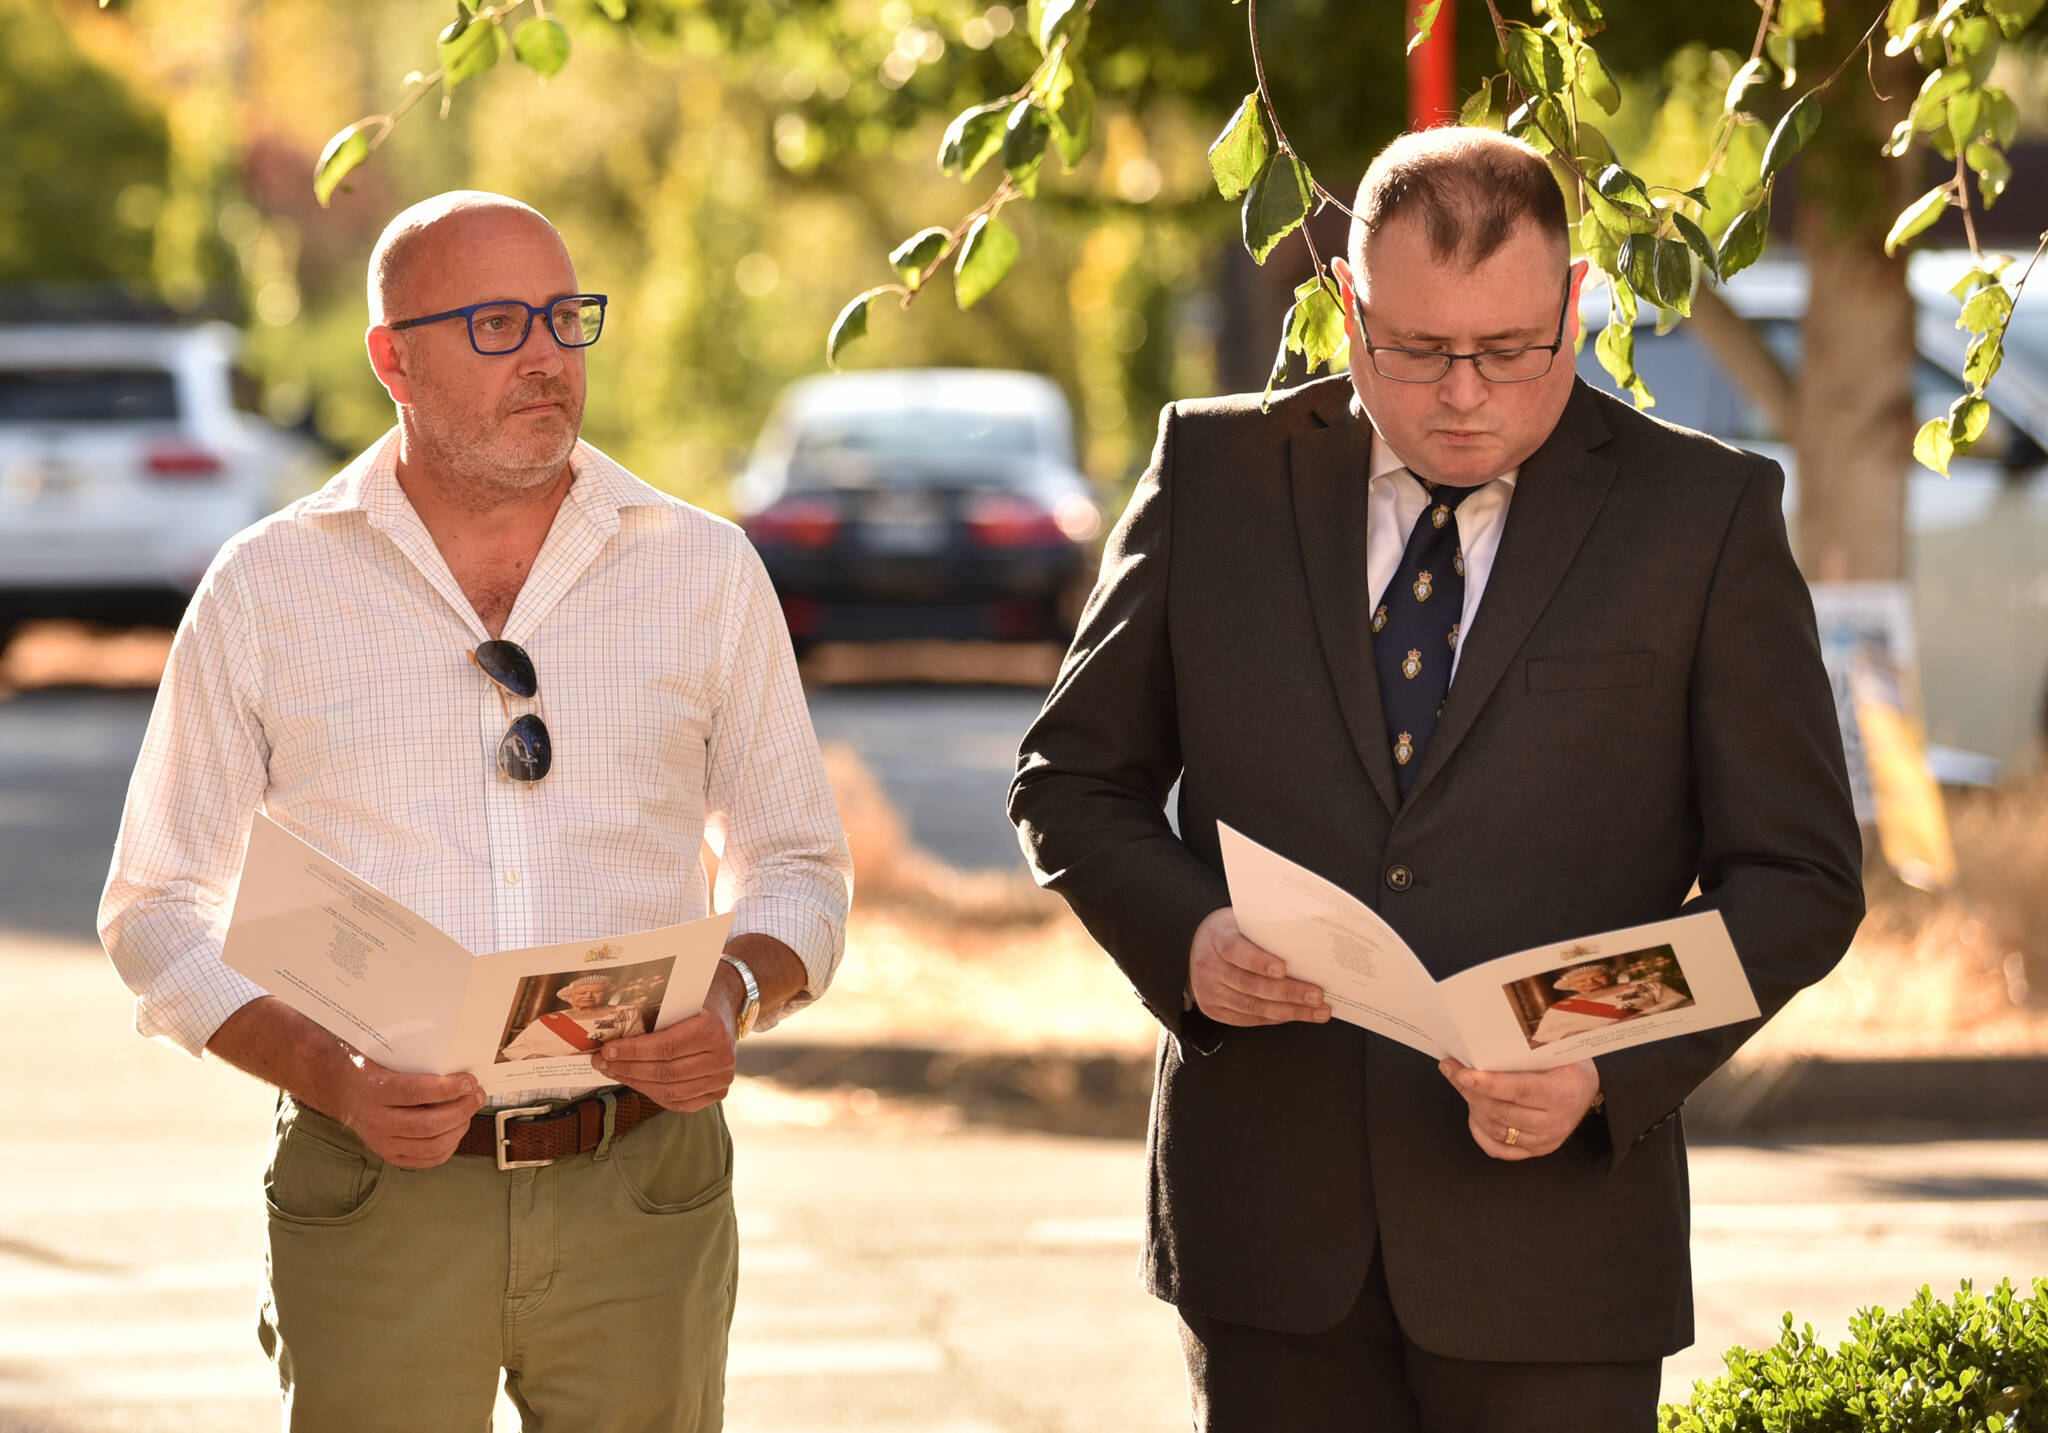 Richard Firth, founder of the BI Brits Facebook group, and Mark Kenny attend the memorial service at Lynwood Center.